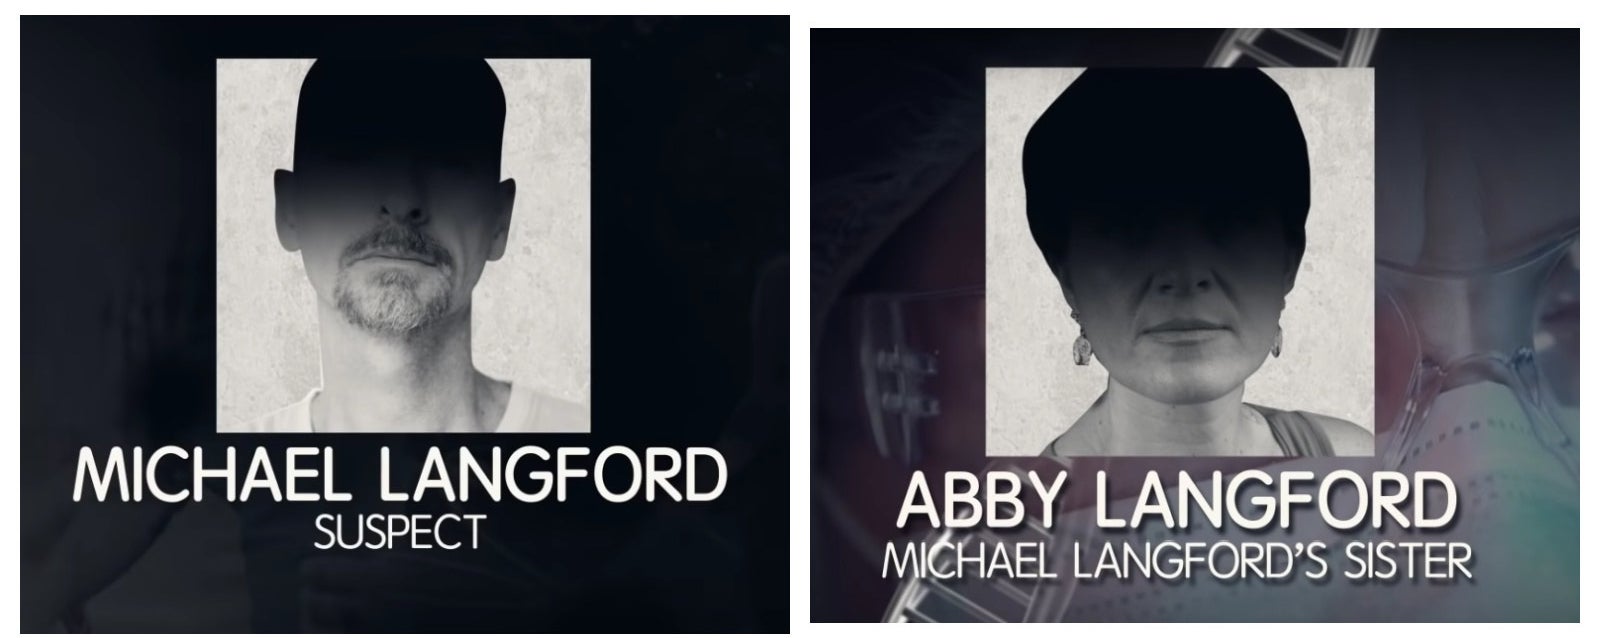 Suspect stills of Michael Langford and Abby Langford